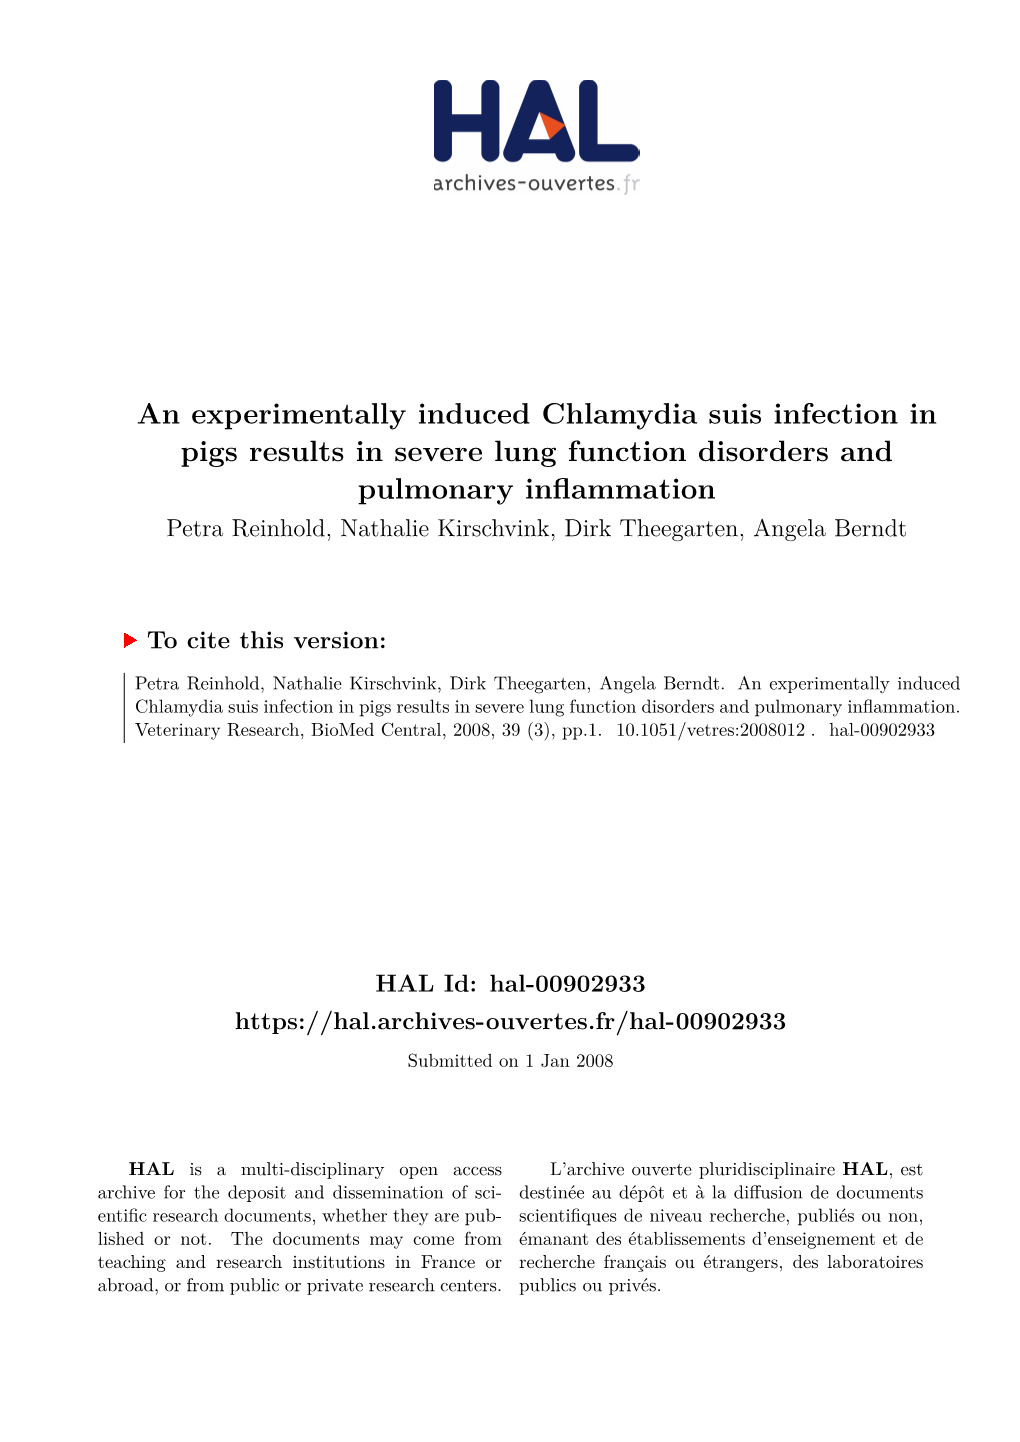 An Experimentally Induced Chlamydia Suis Infection in Pigs Results In